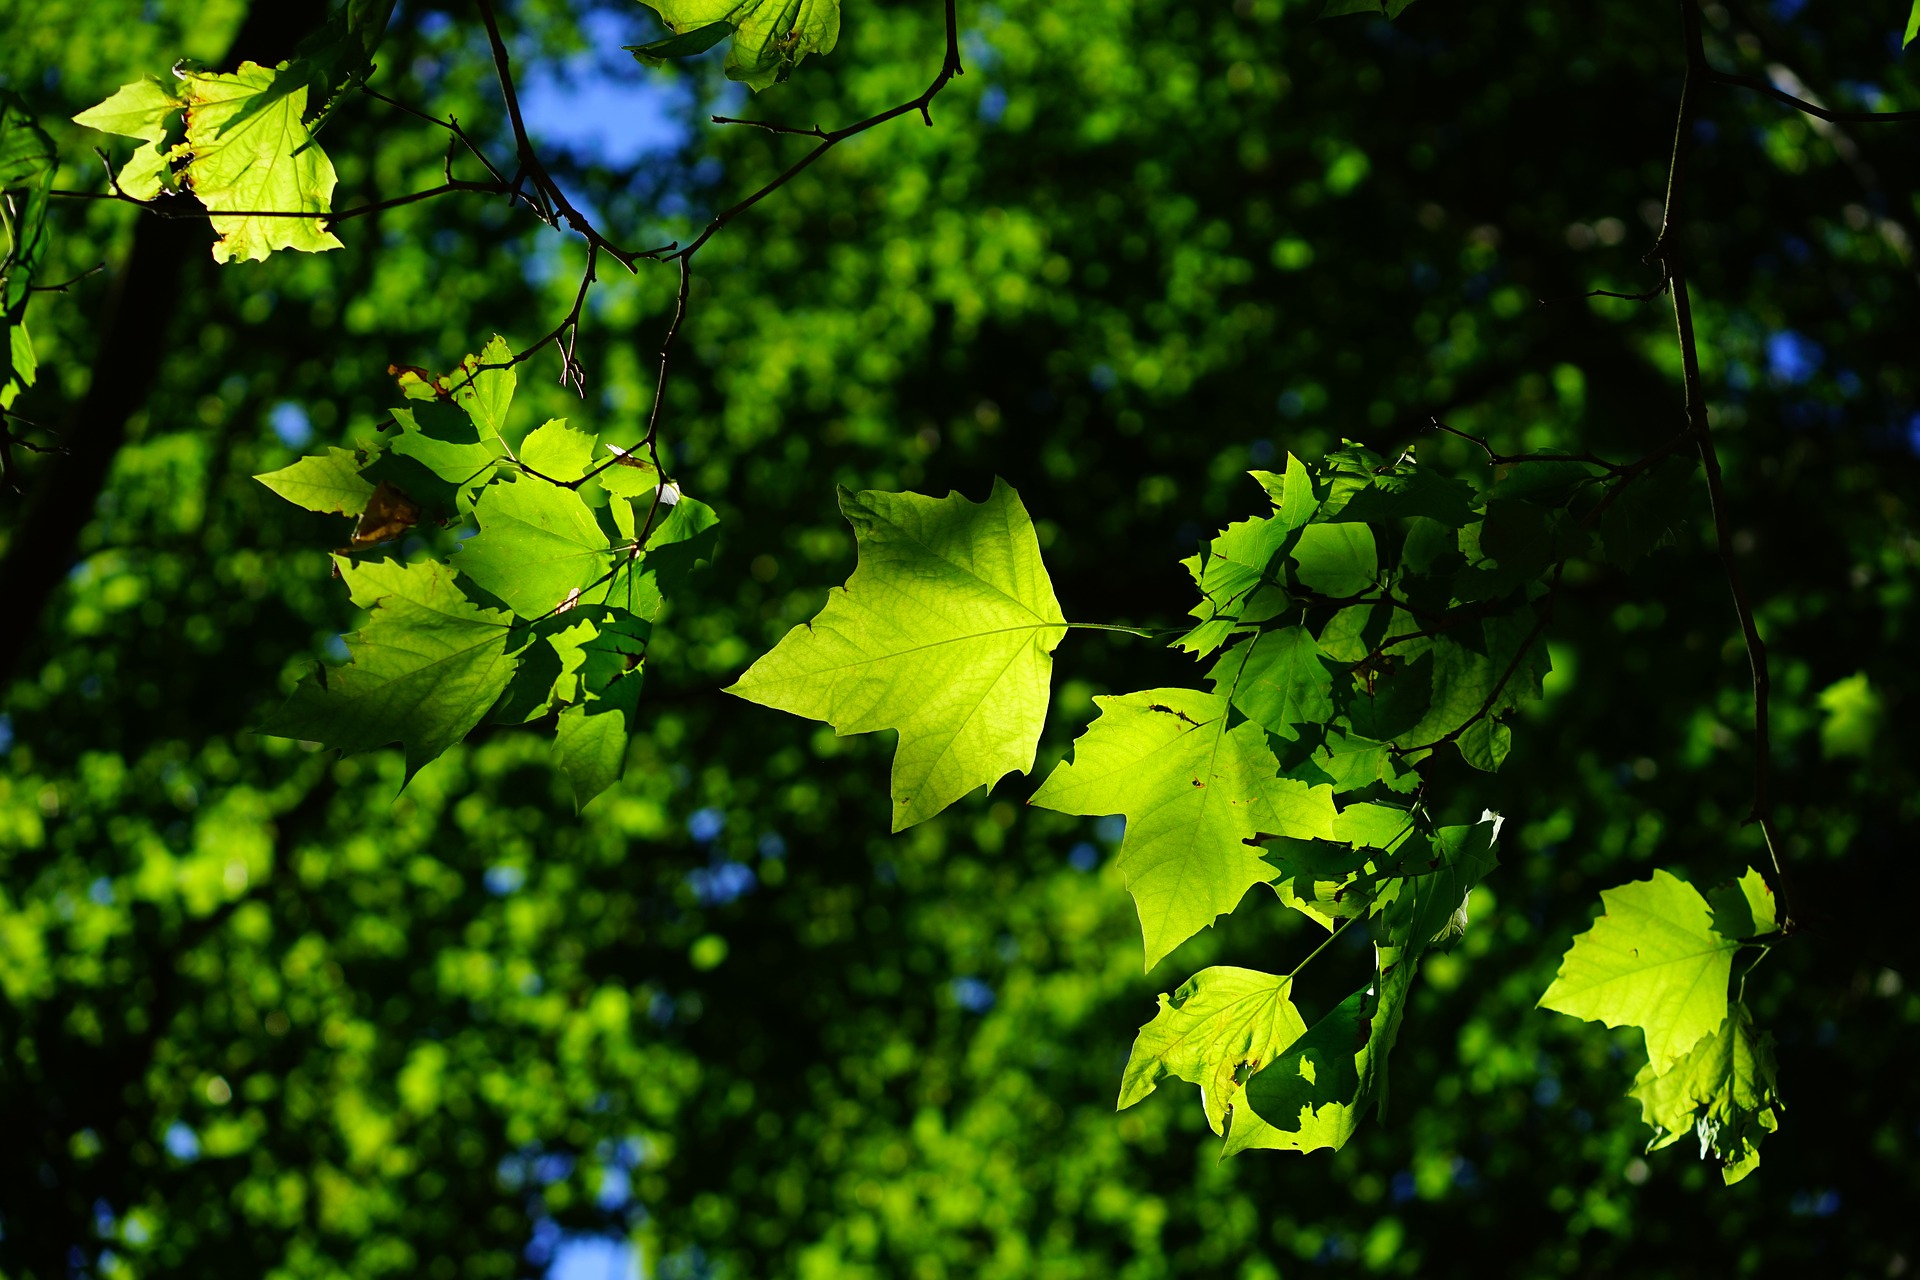 a sycamore tree with its unique leaves